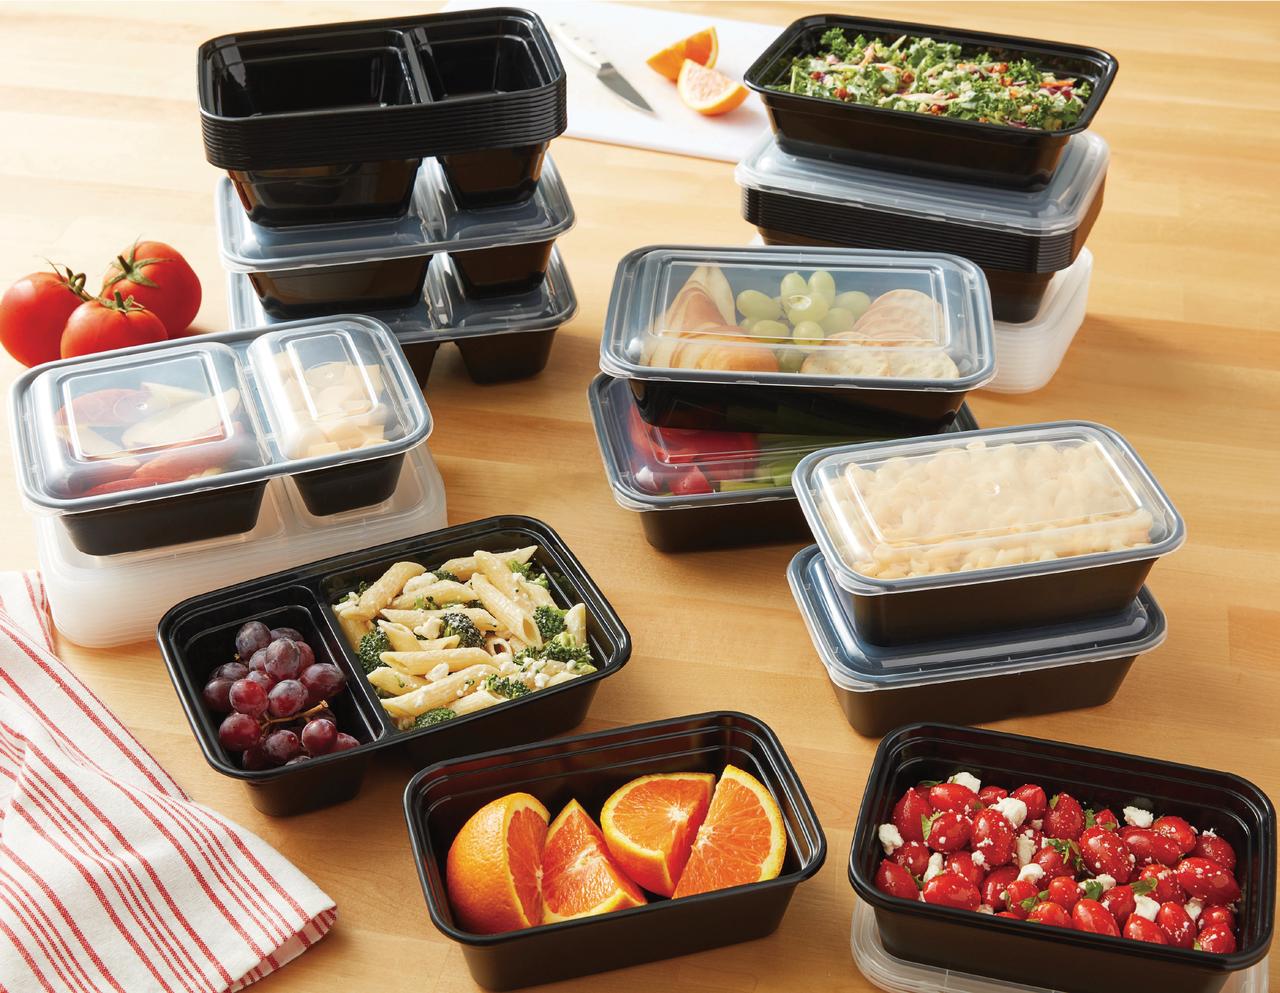 1 & 2 & 3 Compartment Glass Meal Prep Food Storage Containers with Lids, 35  OZ - PACK OF 3